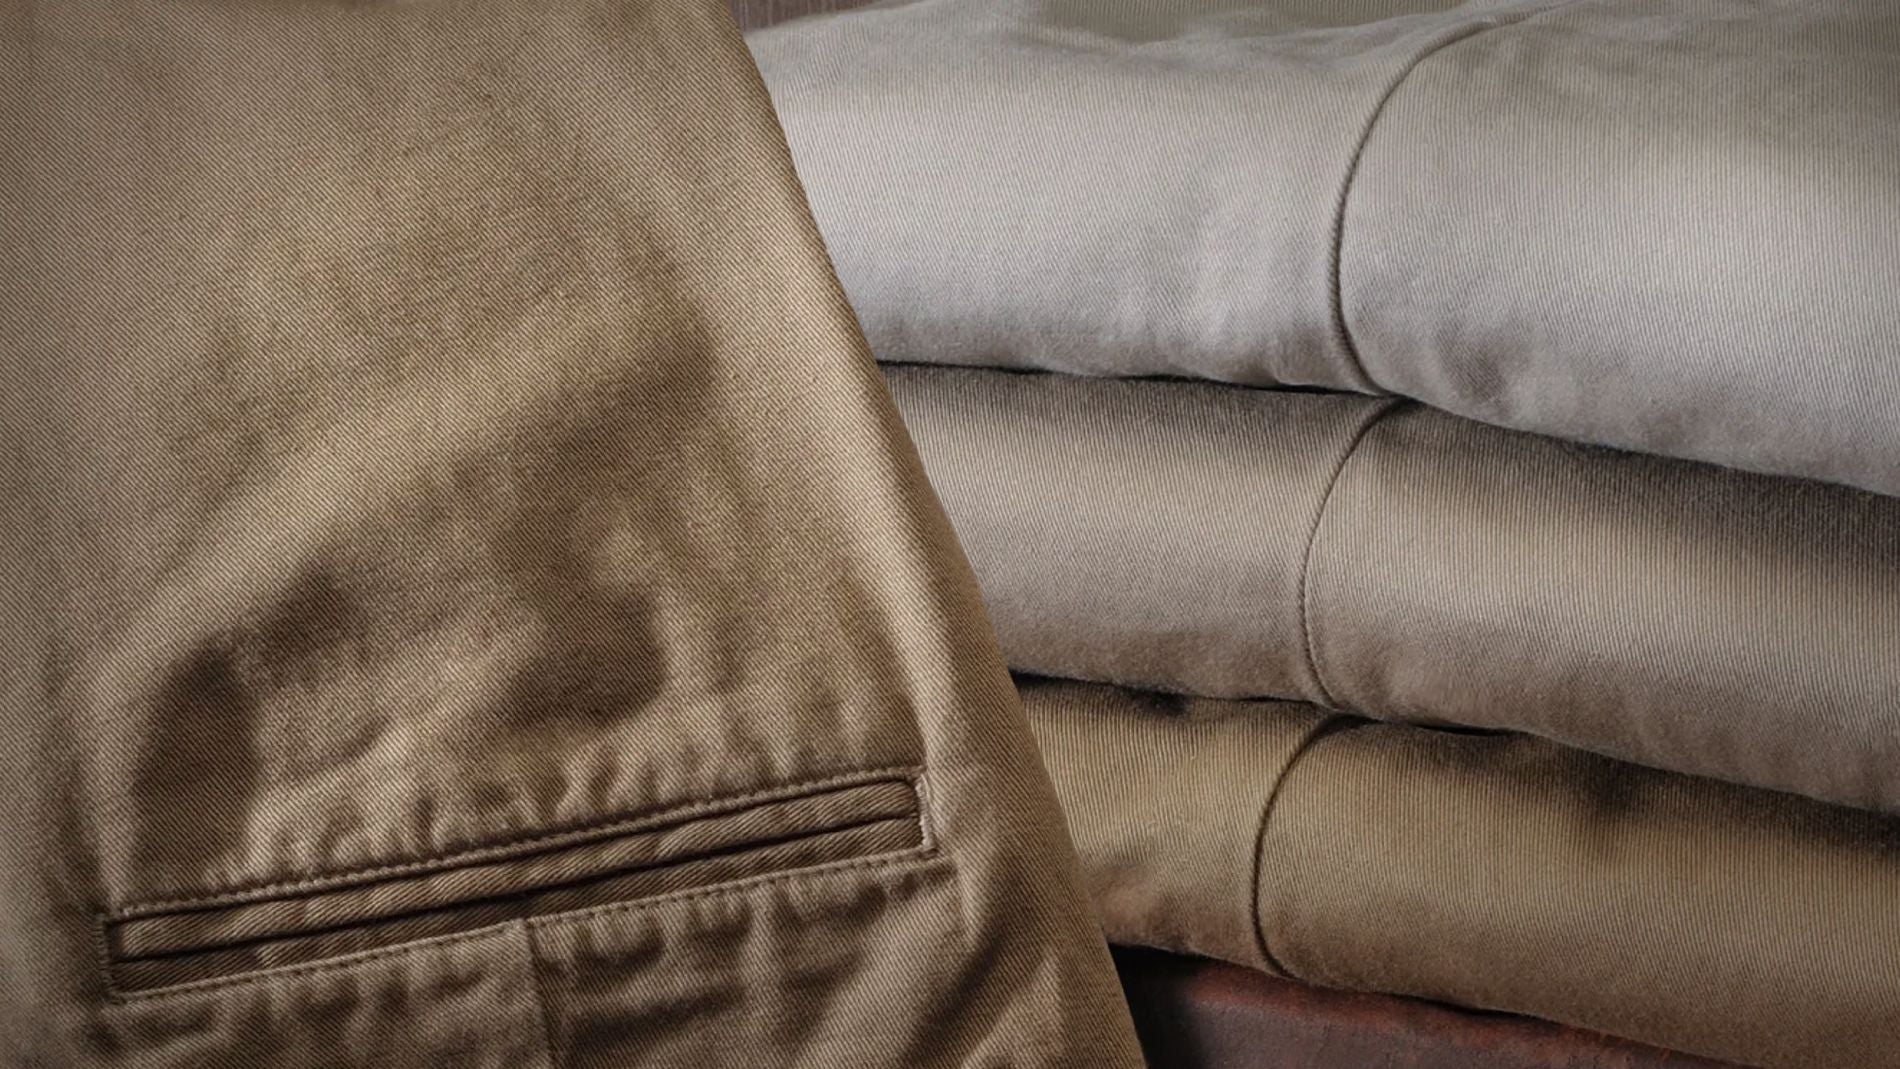 What's NEW from Bills Khakis